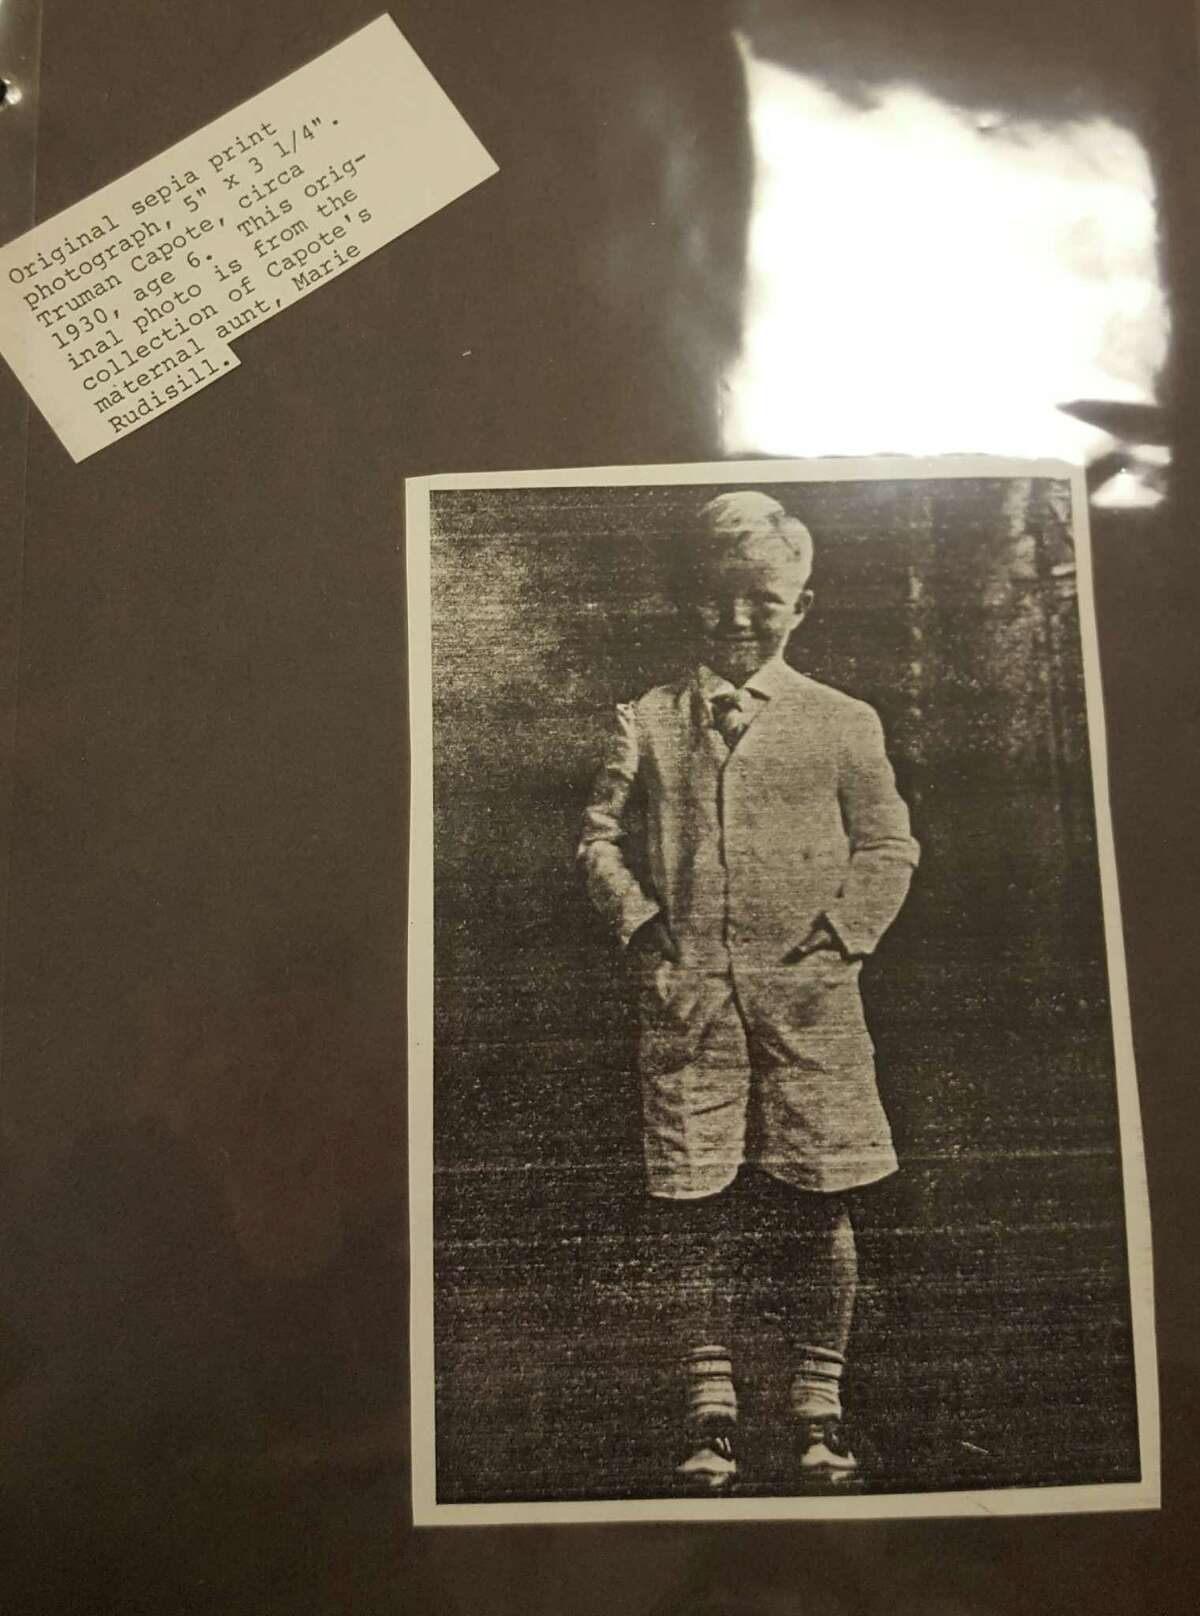 A photograph of Truman Capote as a young boy, from the Greenwich High School collection.